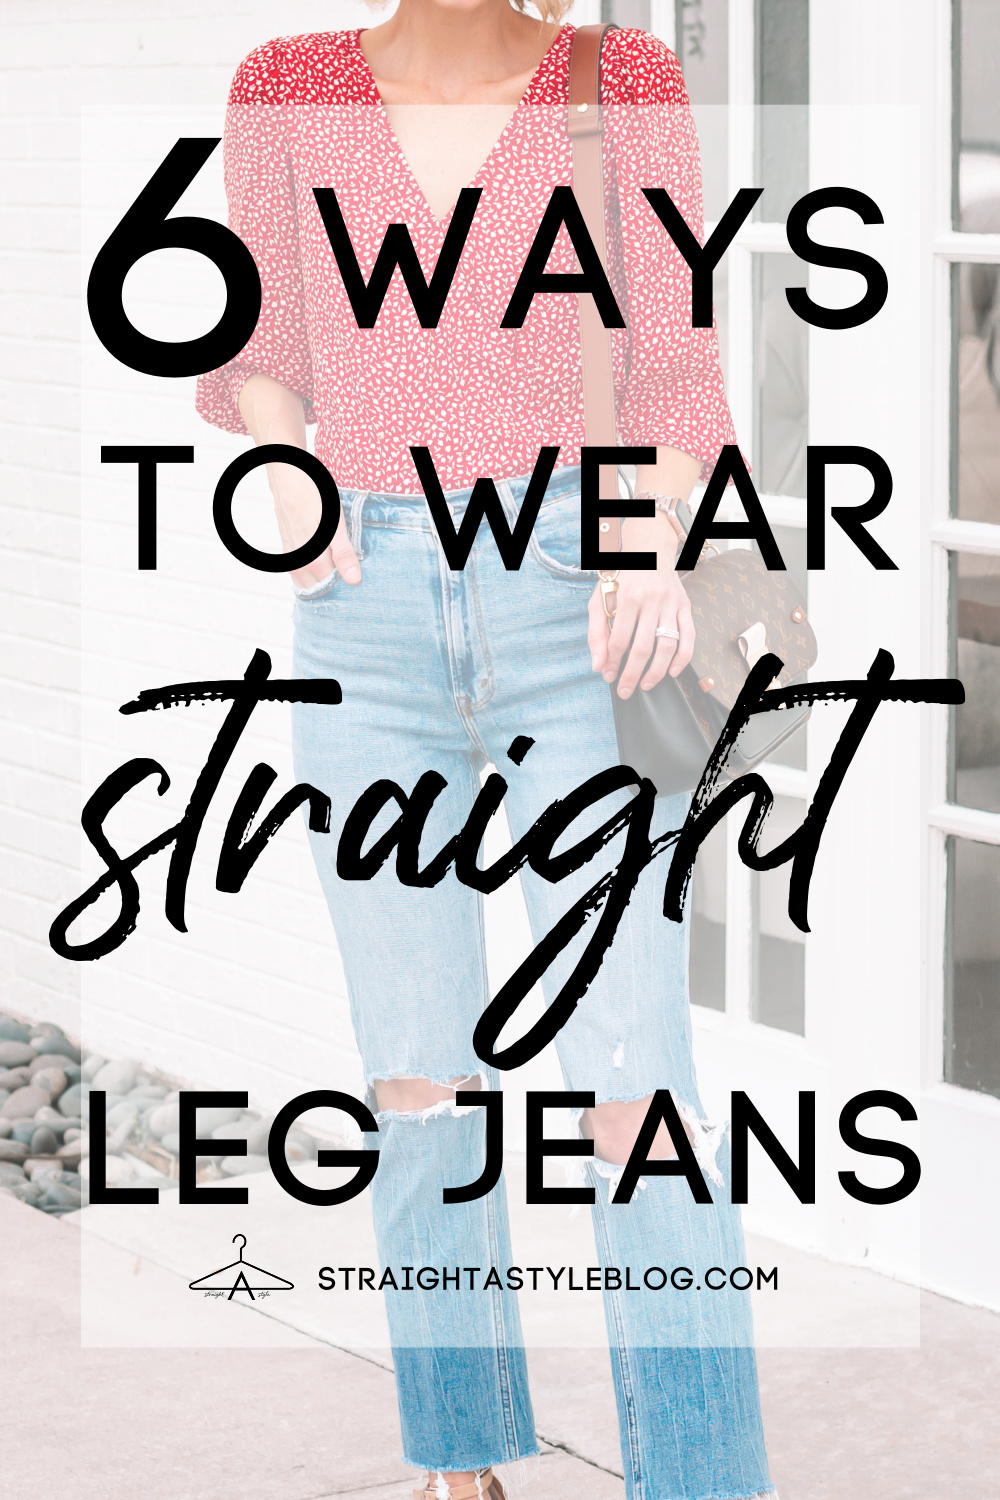 WIDE LEG JEANS HOW TO WEAR, OUTFIT IDEAS & HOW TO STYLE